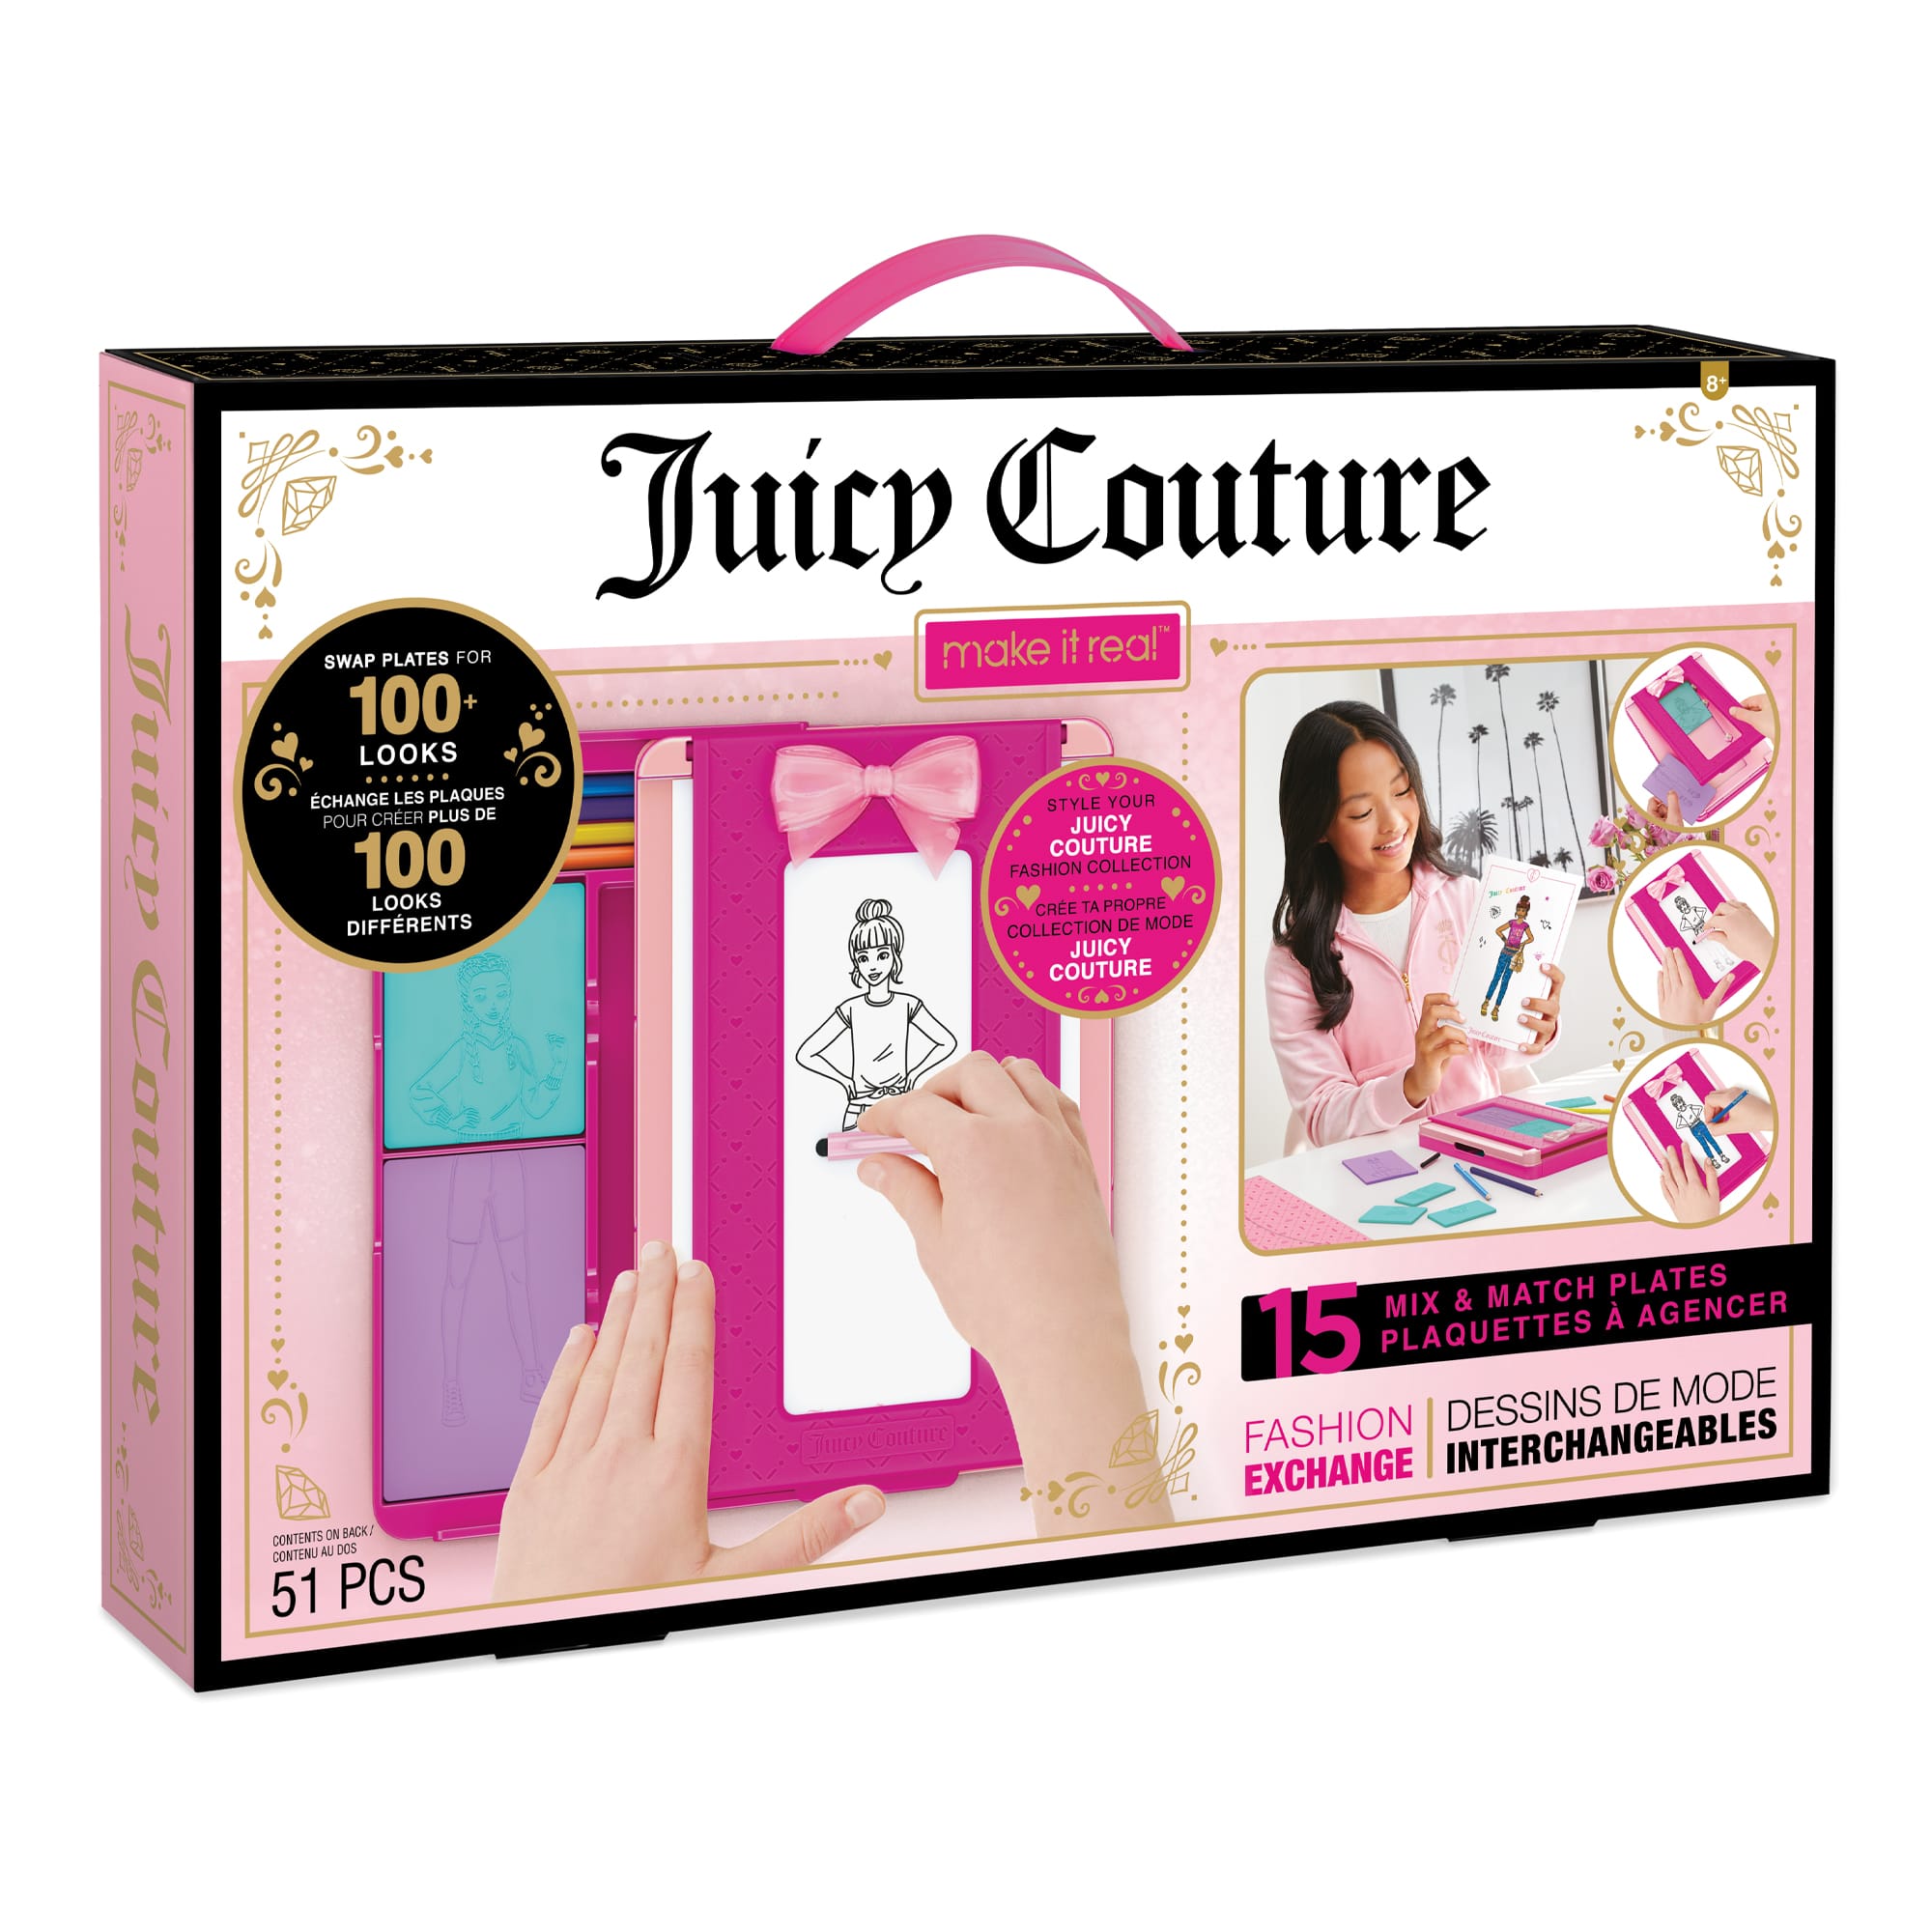 Find the Make It Real™ Juicy Couture DIY Chains & Charms Kit at Michaels